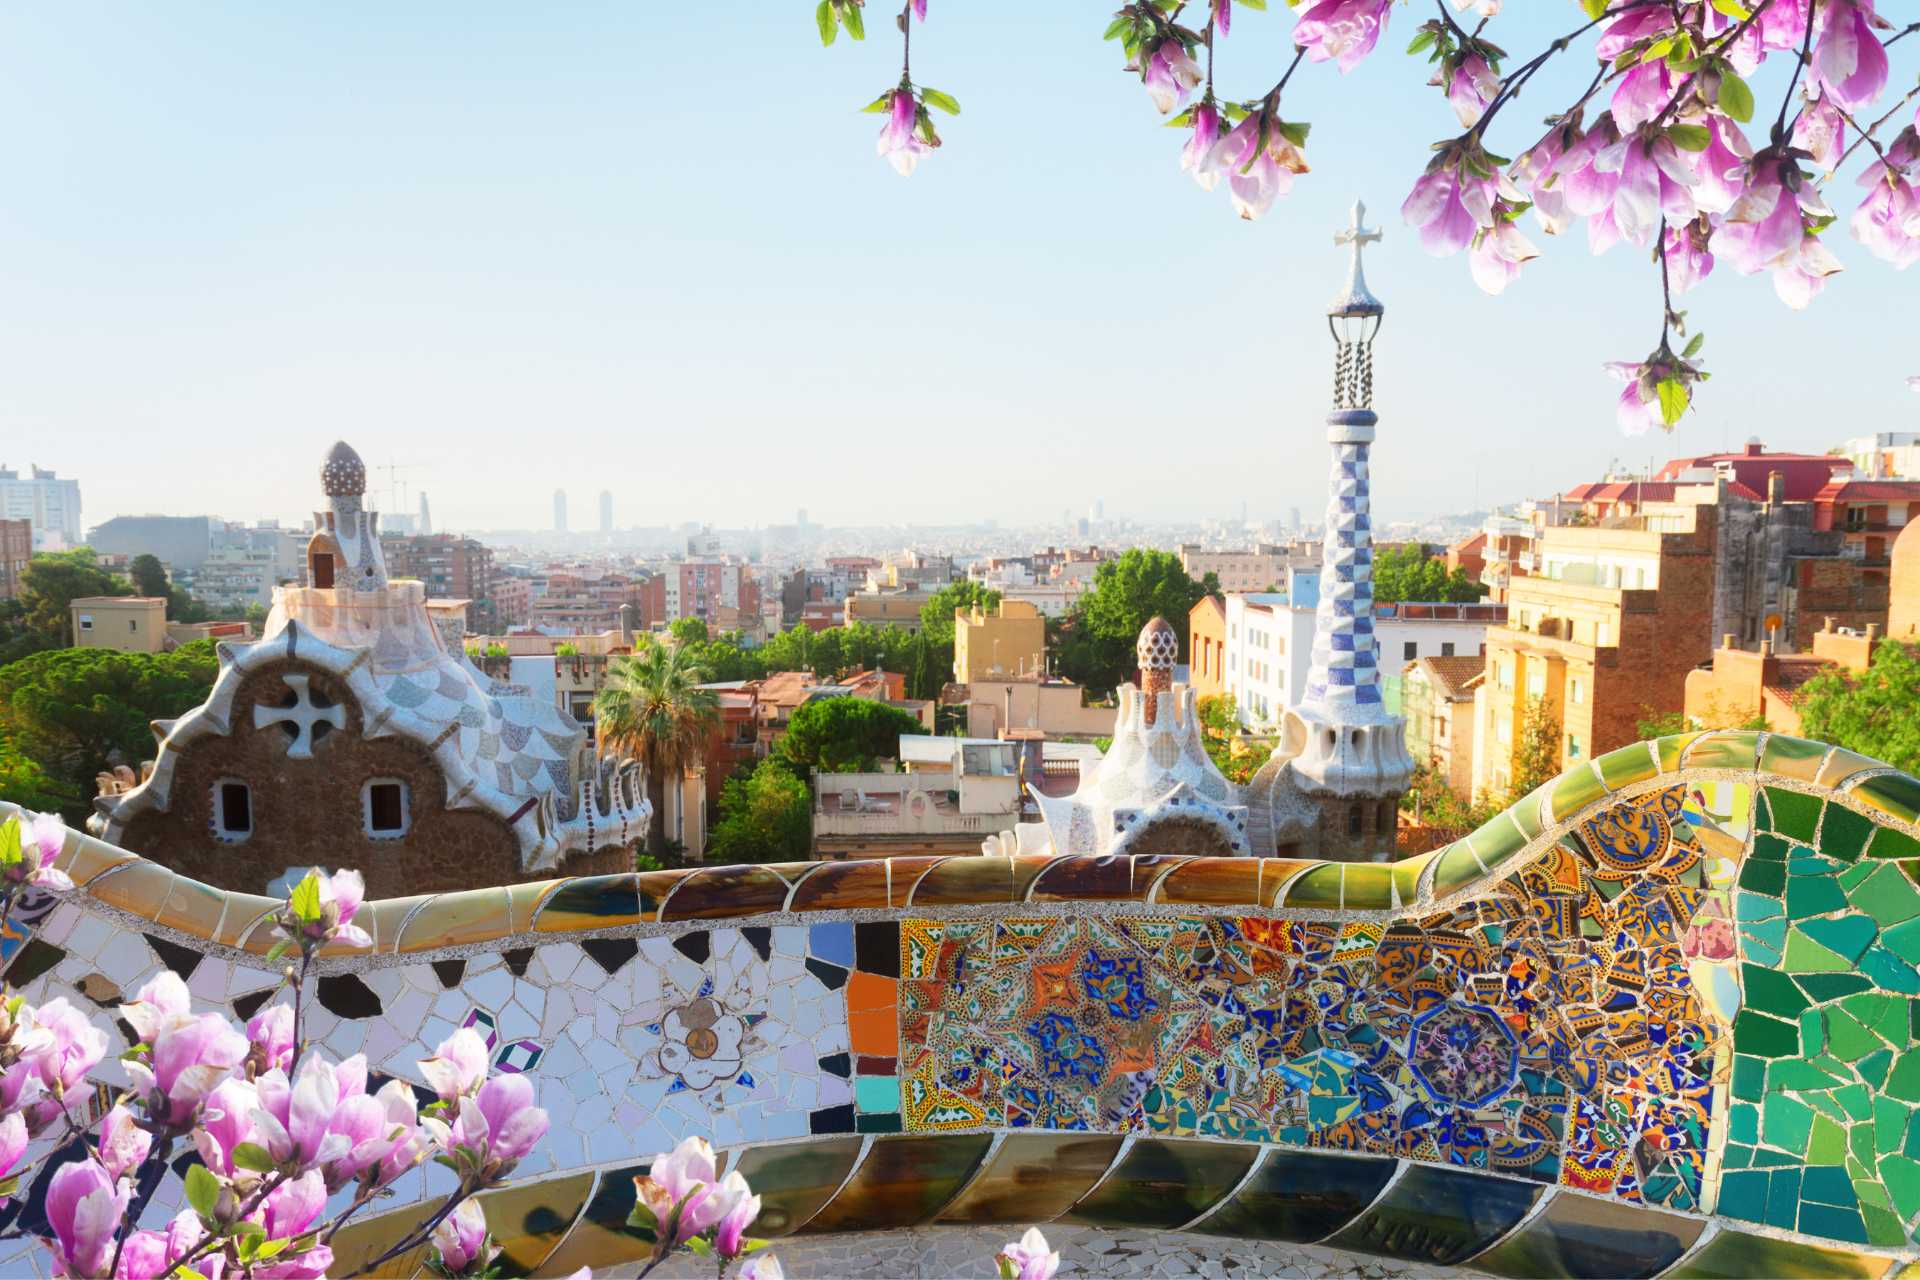 Park Guell, Barcelona ©Getty Images